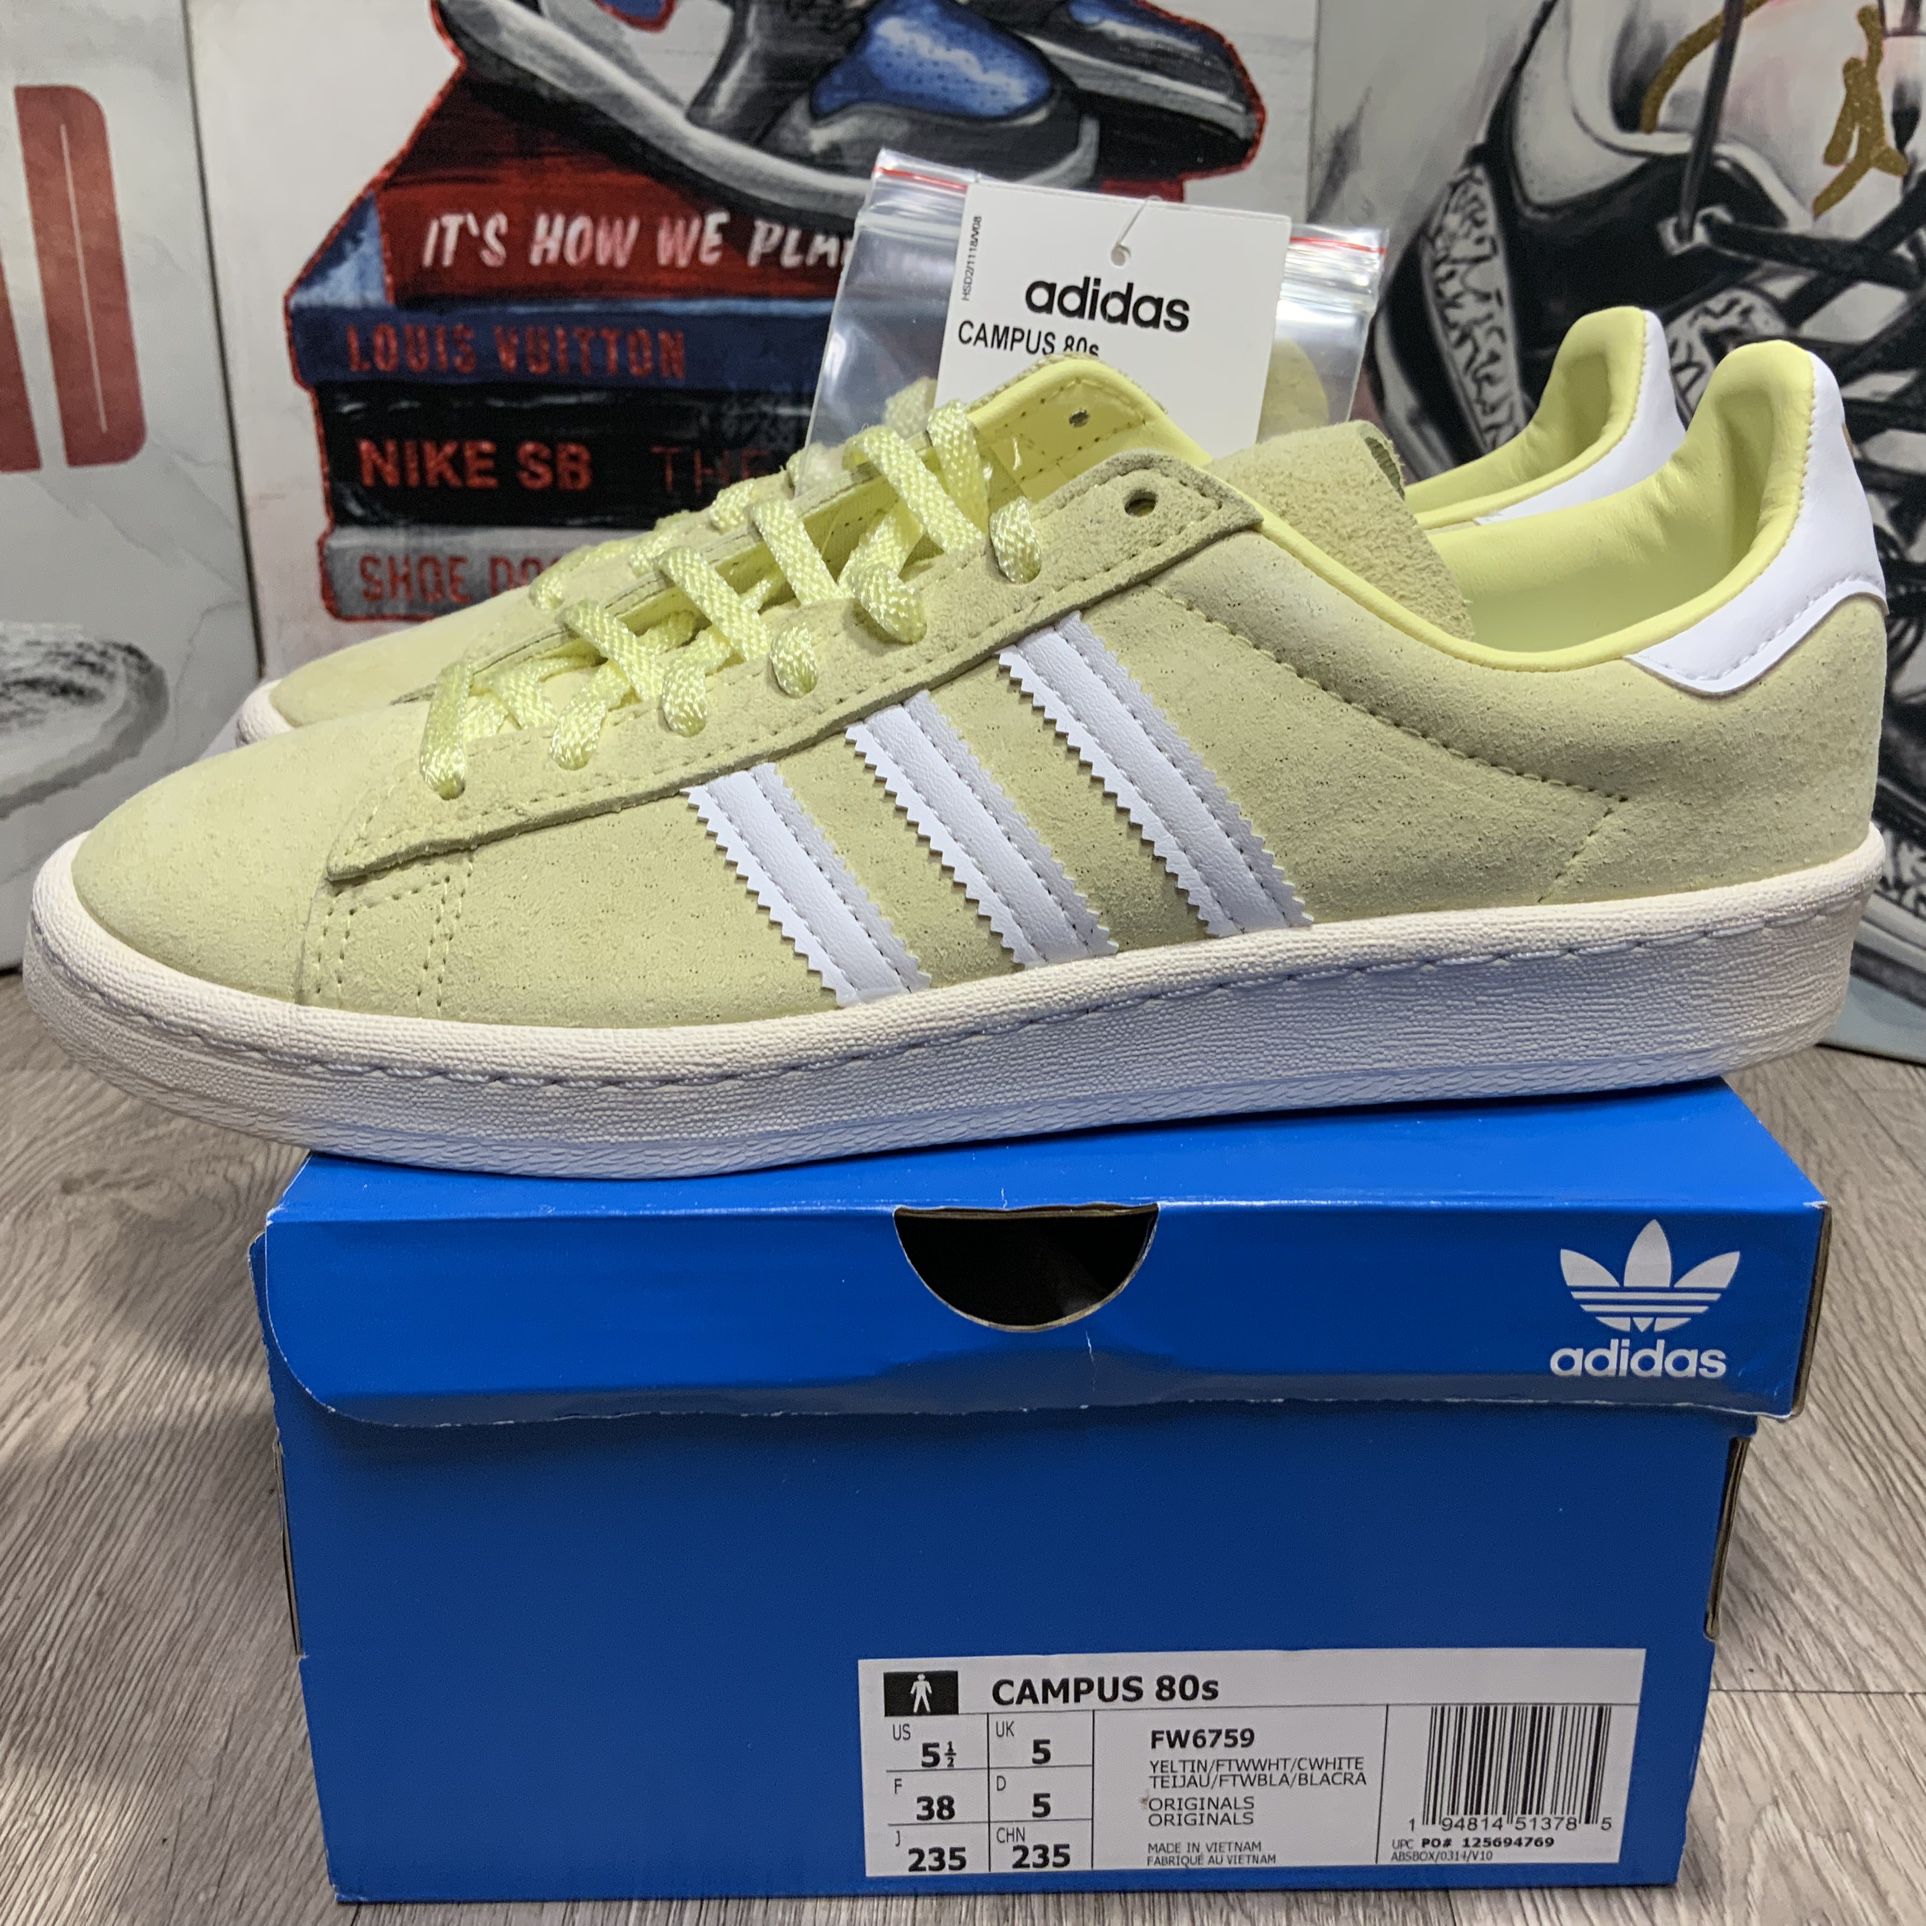 New Mens adidas Originals Campus 80s Homemade Pack Lemonade Shoes 5.5M/7Women- 6M/7.5 Women US. for Sale in San CA - OfferUp